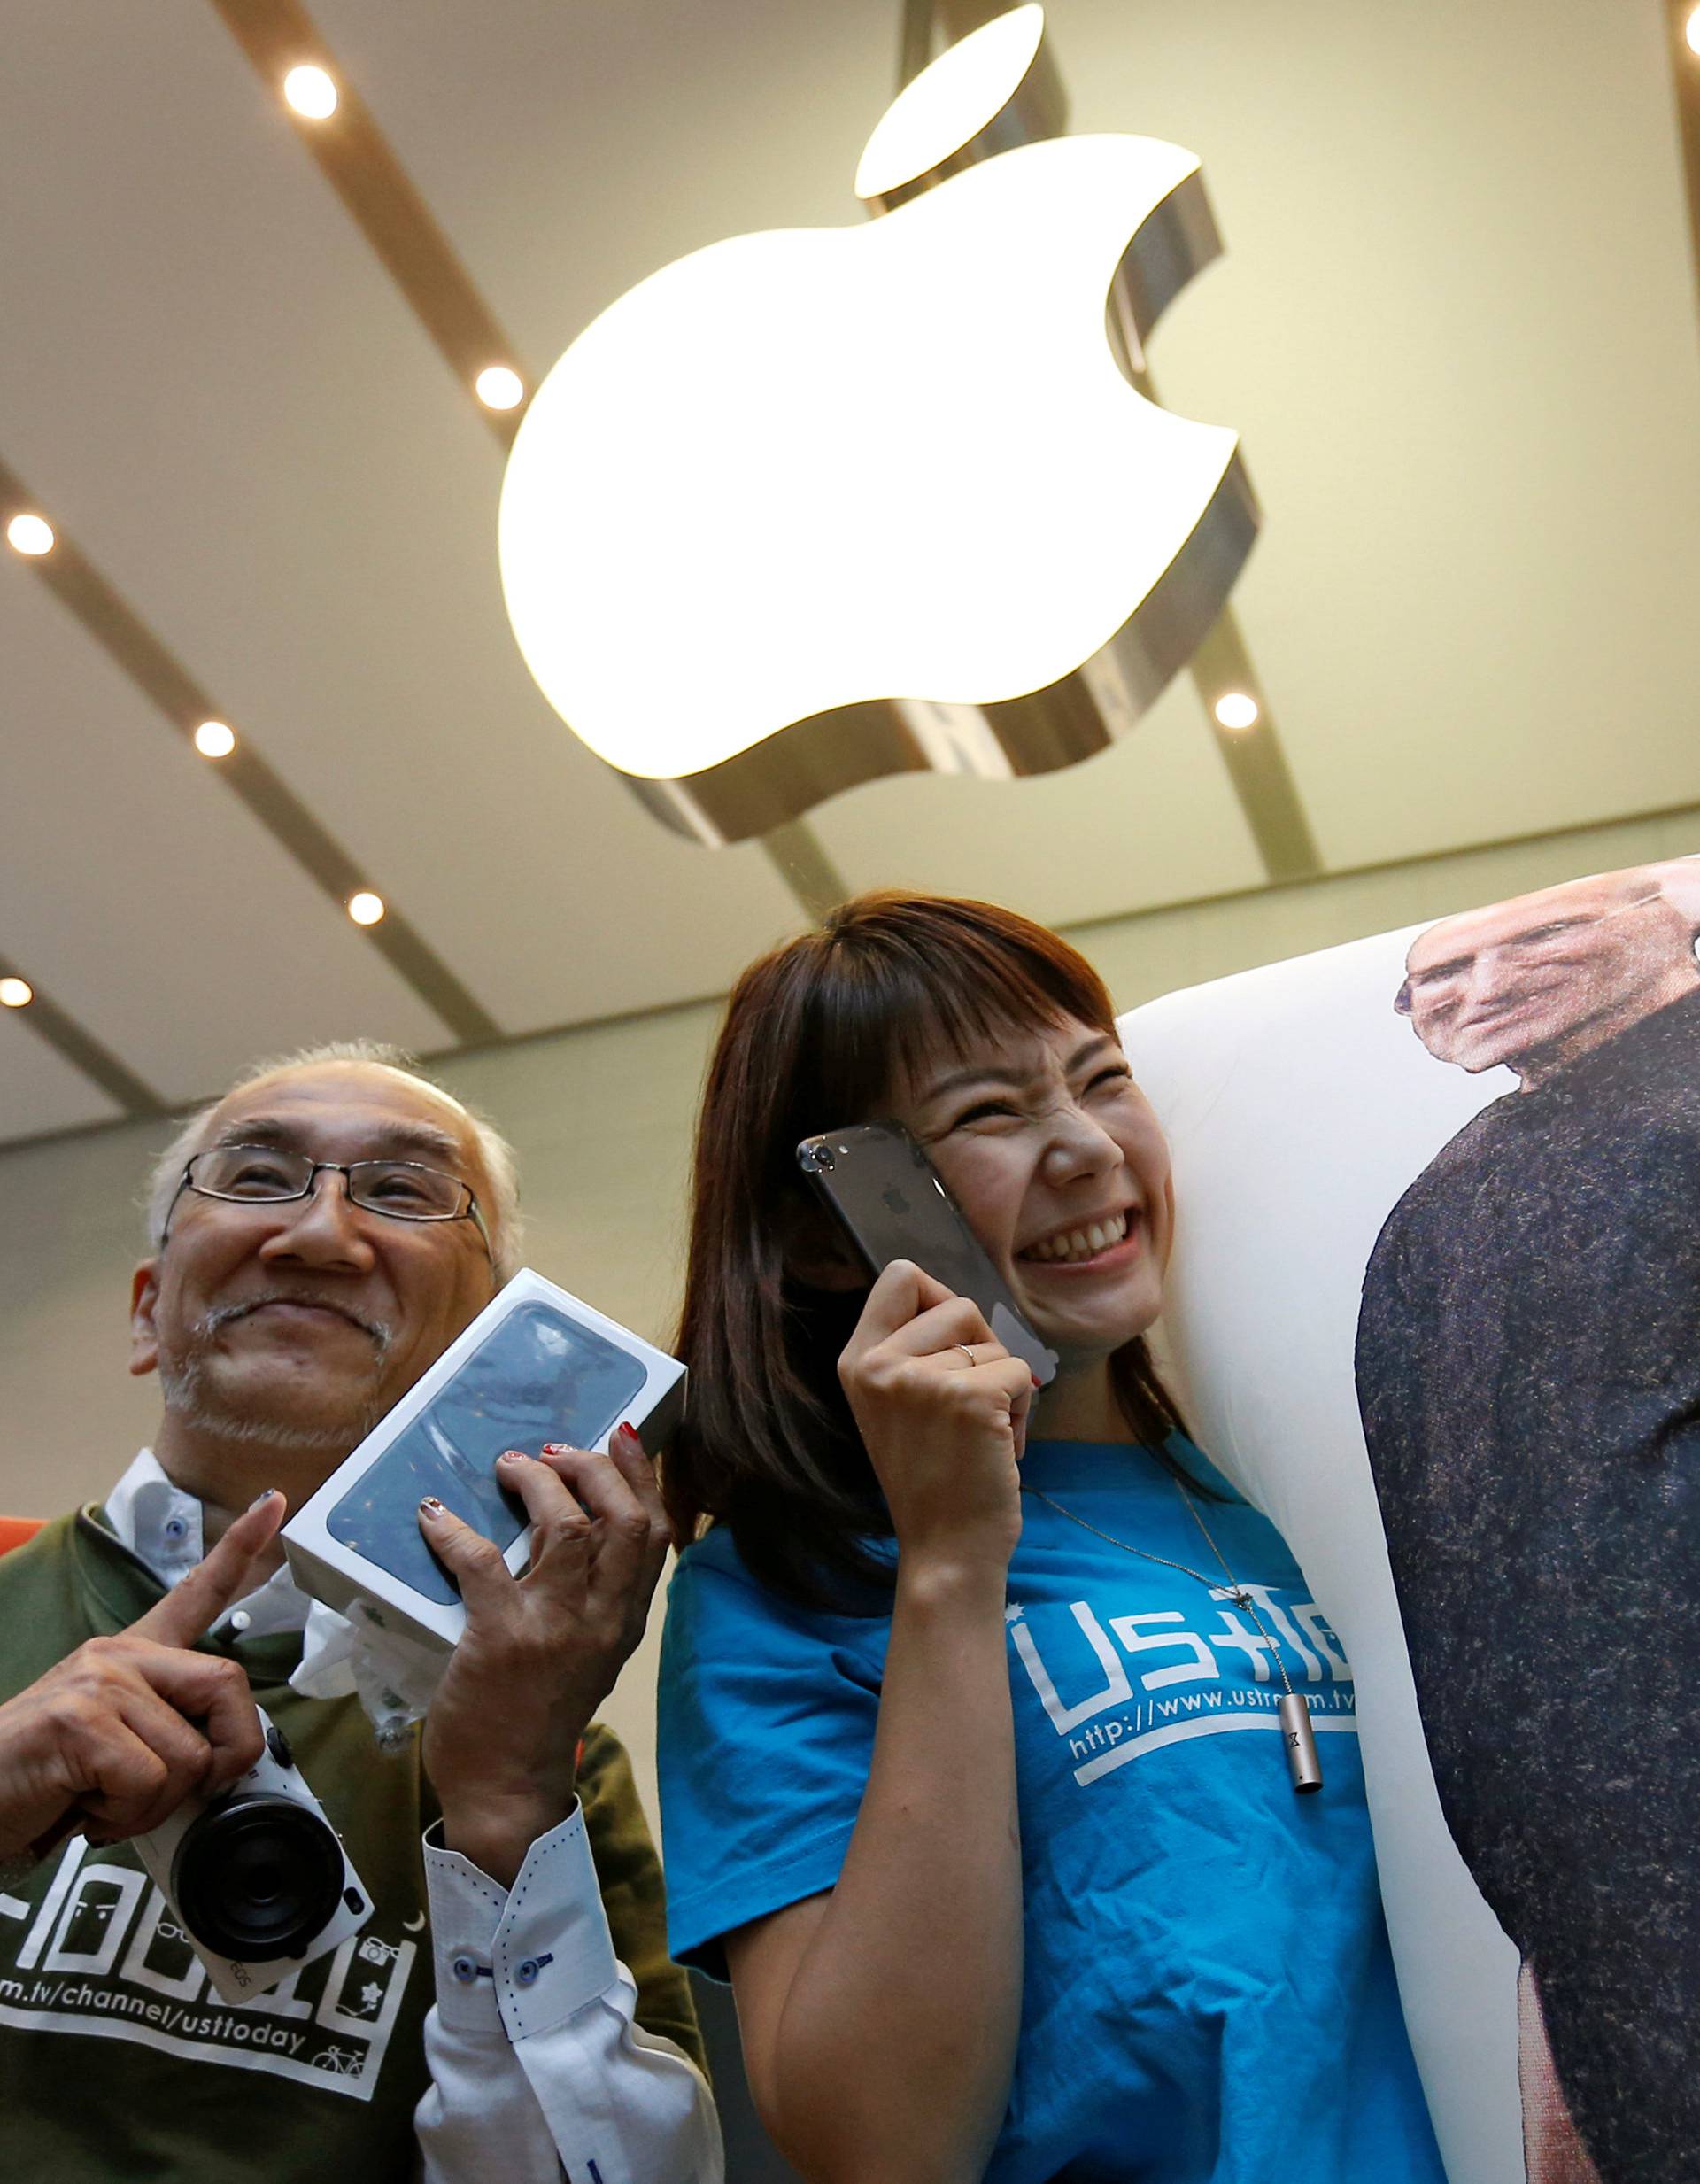 Customers pose with their new Apple's iPhone 7 after purchasing them at the Apple Store at Tokyo's Omotesando shopping district